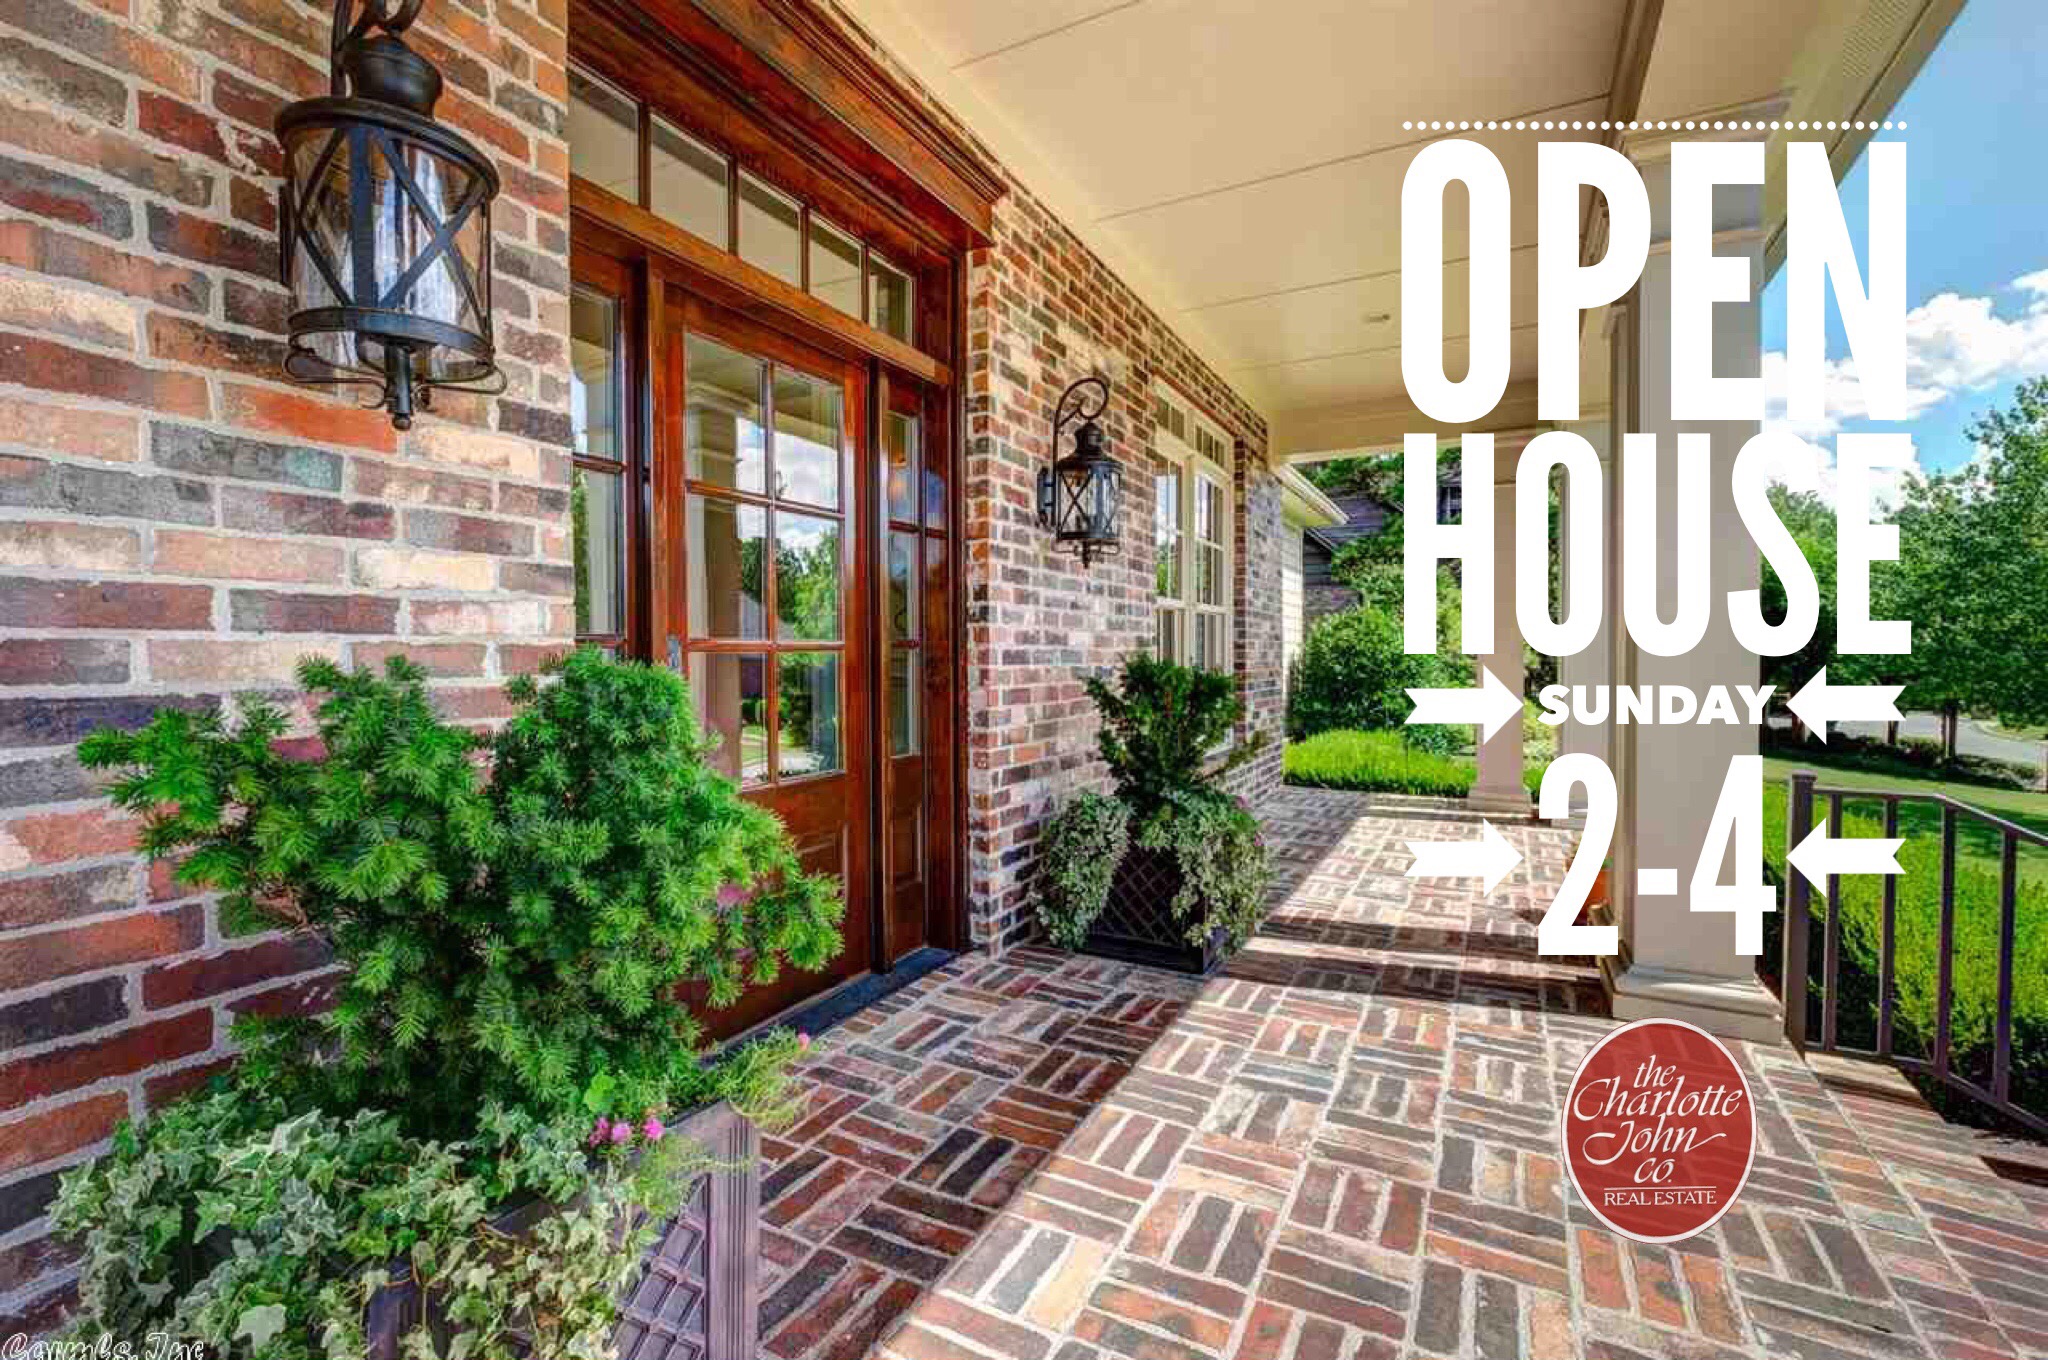 Open House Sunday, August 30th